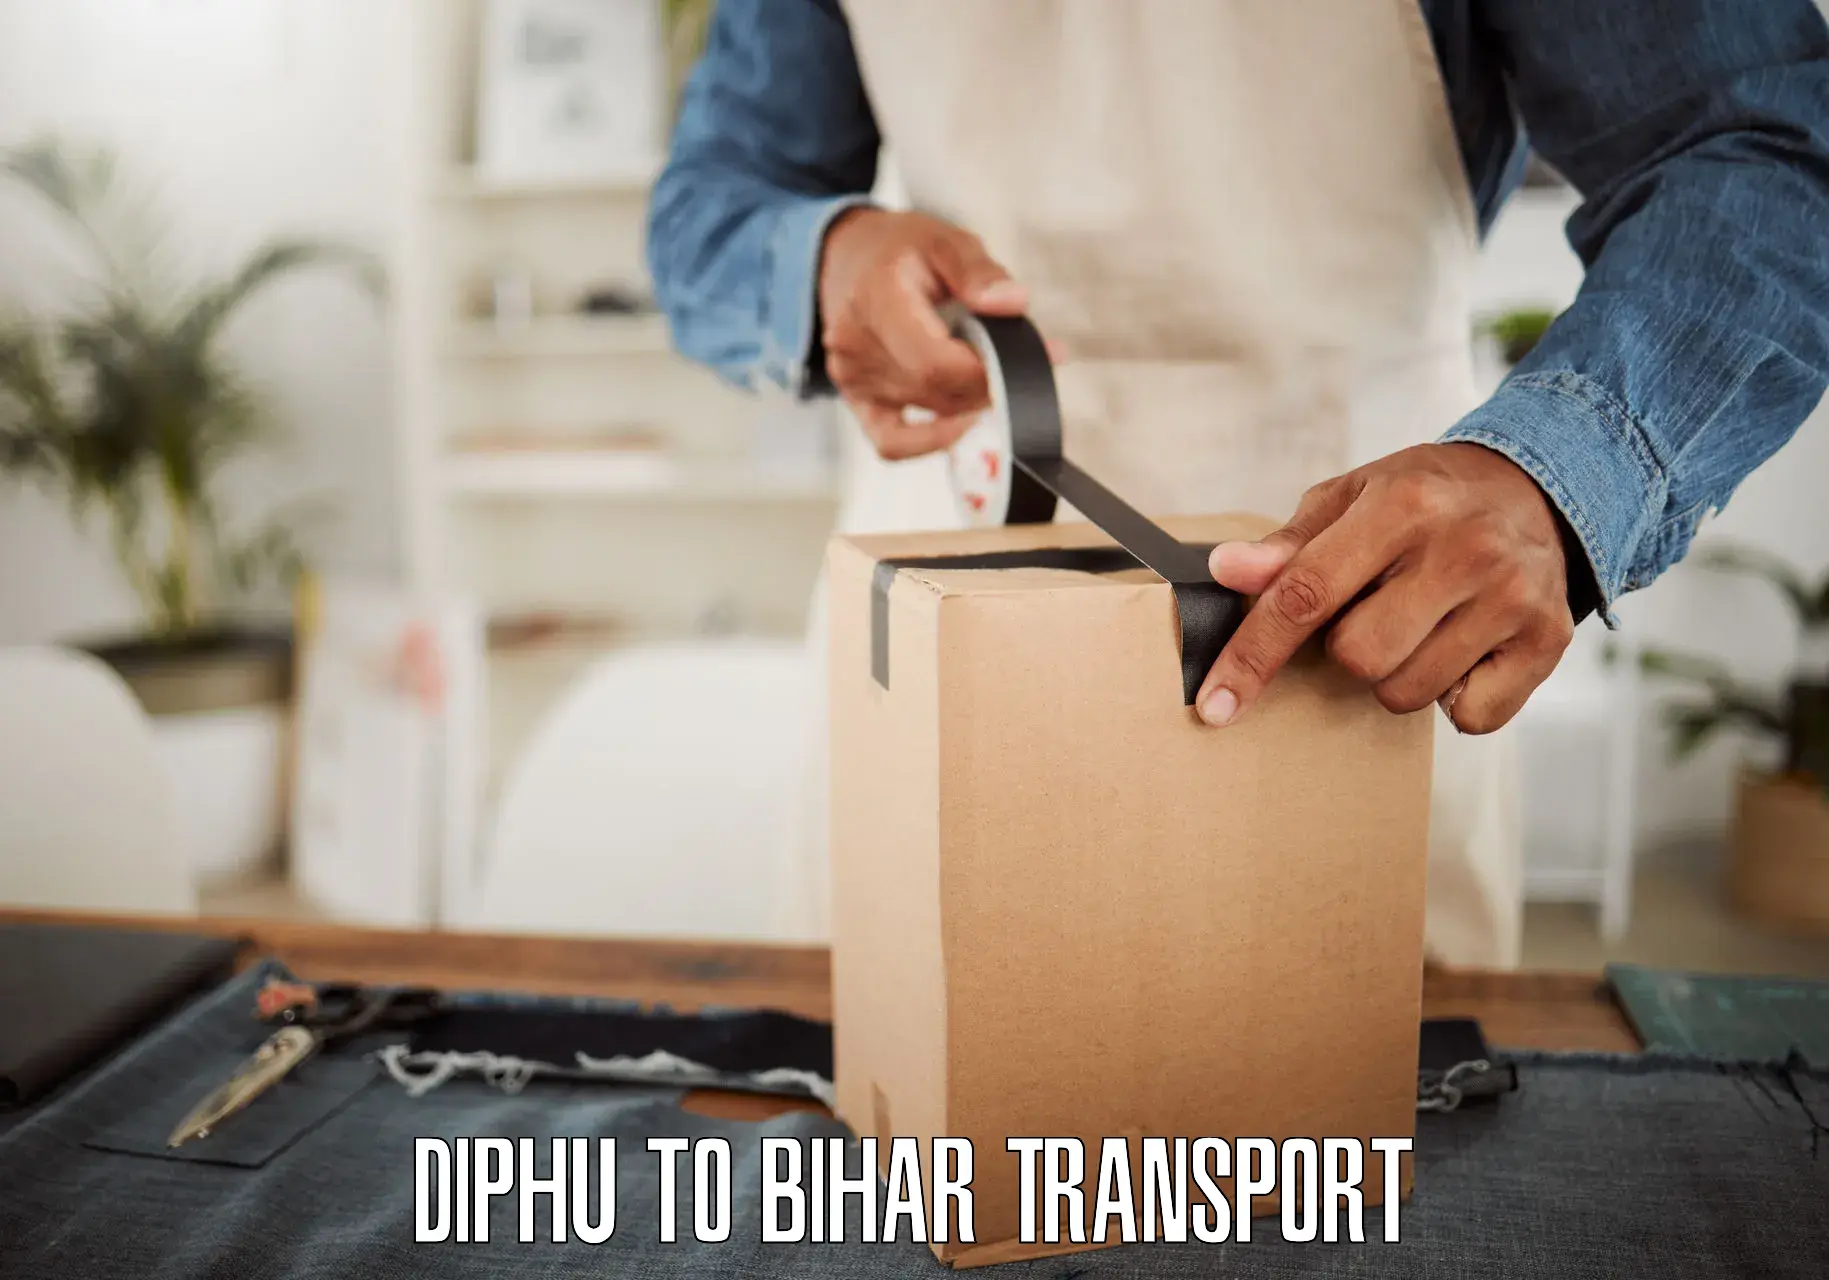 Truck transport companies in India Diphu to Dholi Moraul